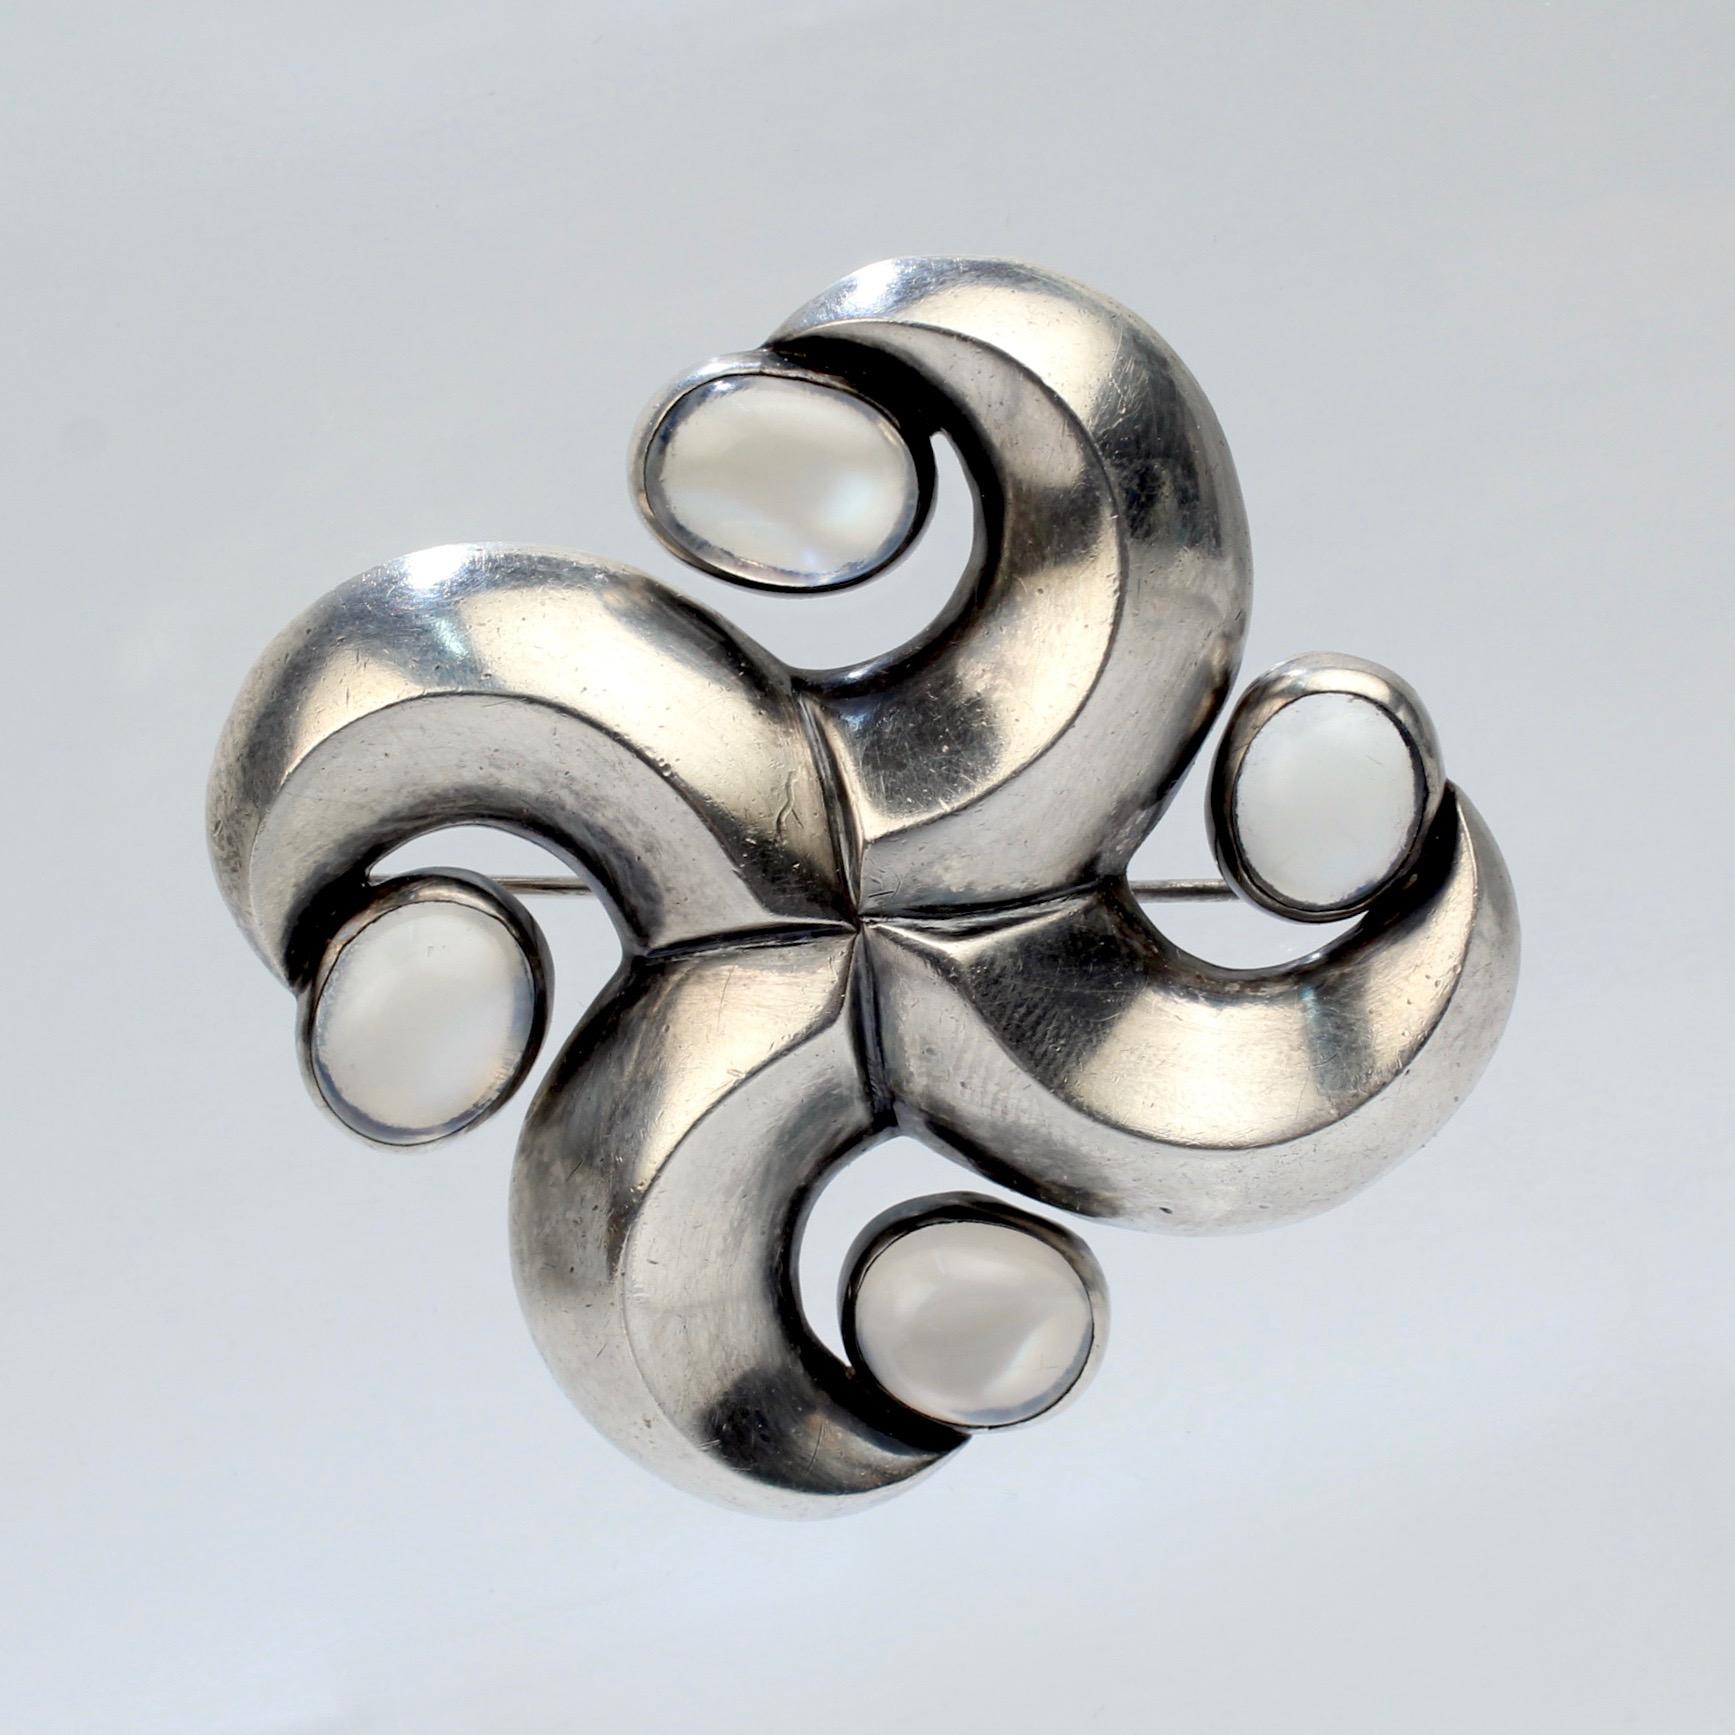 A fantastic swirled star or pinwheel brooch by Antonio Pineda. 

In sterling silver and set with moonstone cabochons. 

Antonio Pineda was a renowned Mexican silversmith and jewelry maker. His jewelry is among the most coveted Mid-Century Mexican